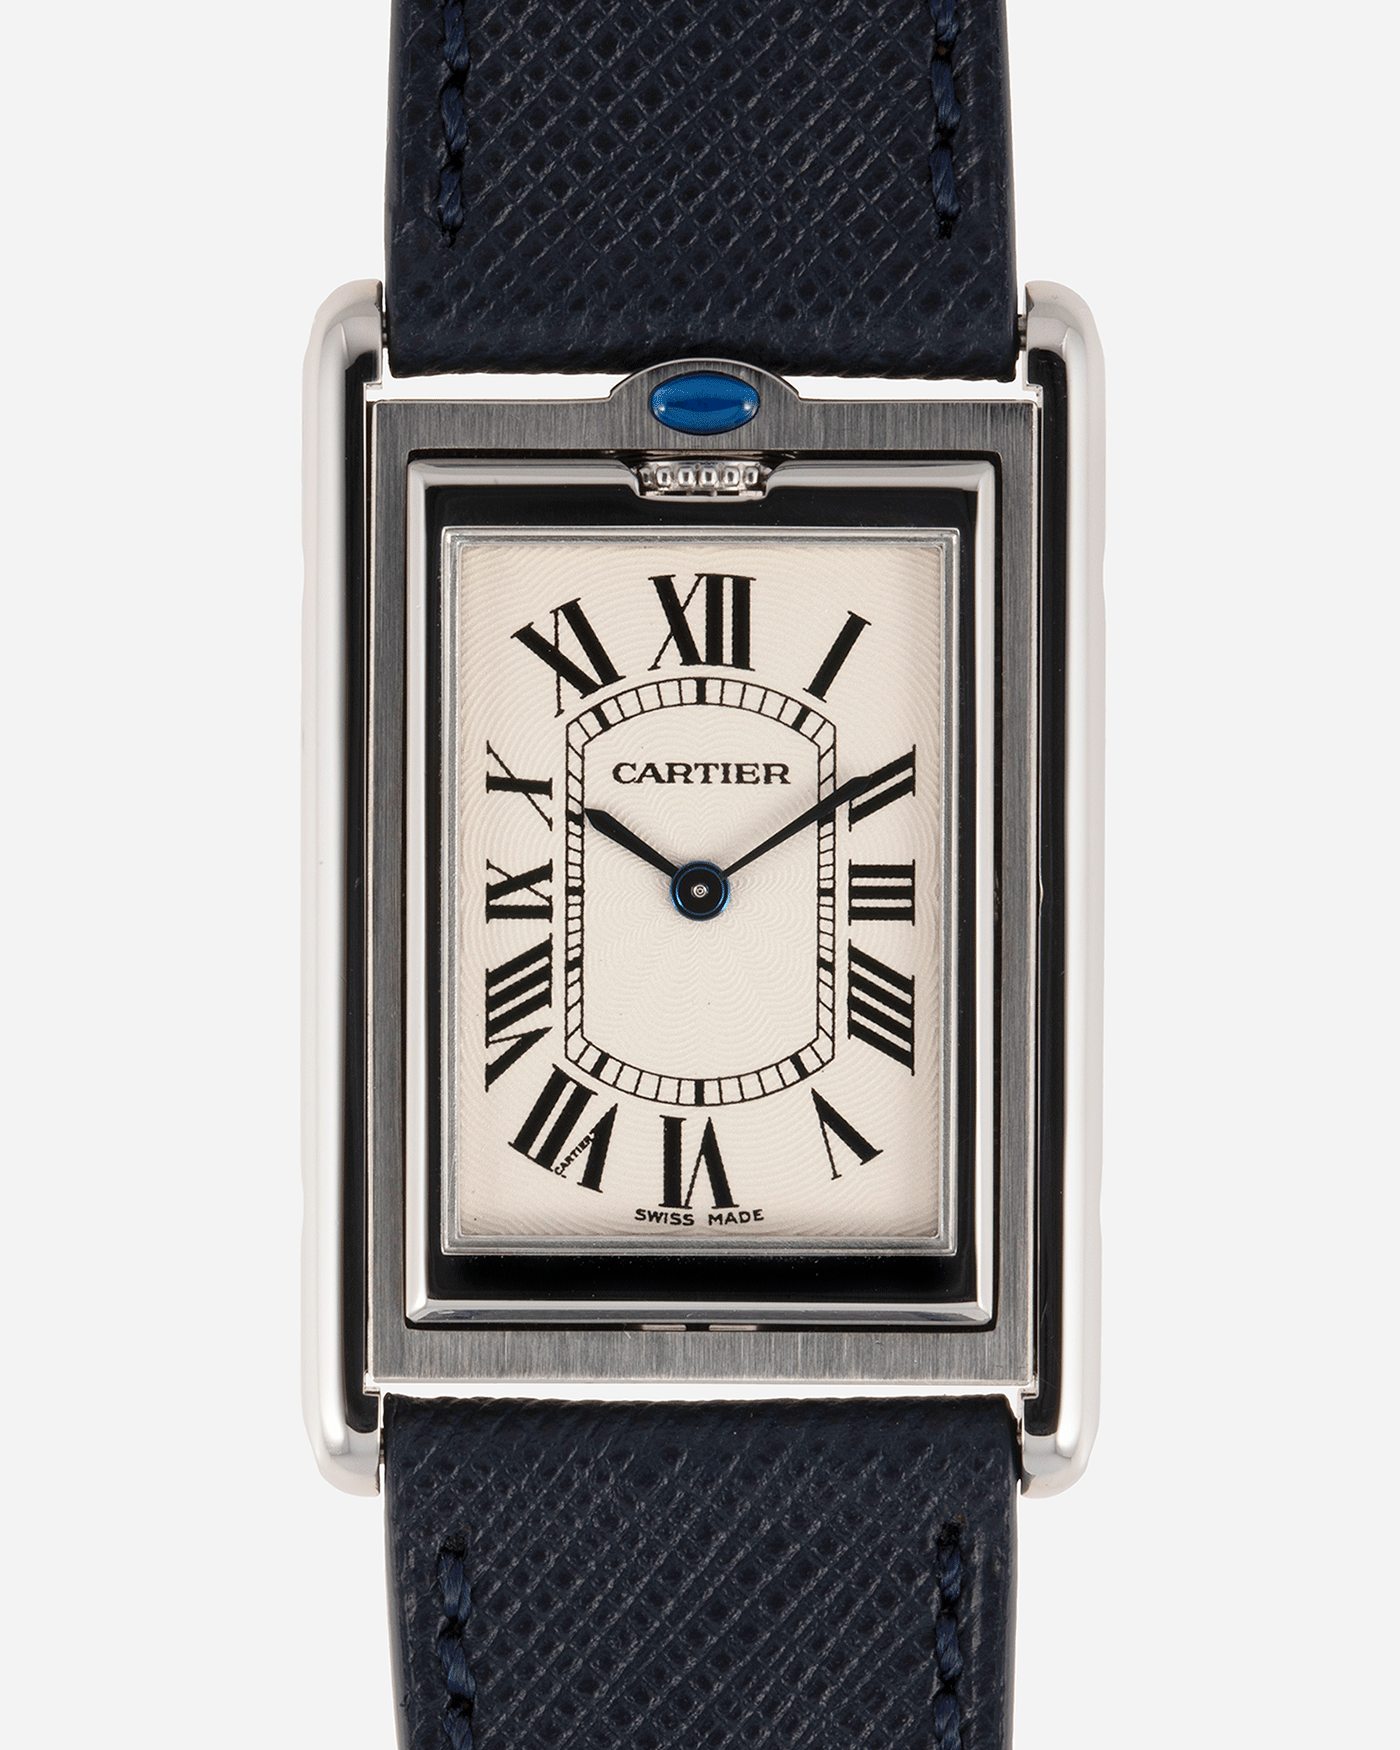 Brand: Cartier Year: 2001 Model: Tank Basculante Millenium Reference: 2390 Material: Stainless Steel Movement: Piguet-derived Cartier cal. 050 MC Case Diameter: 26 x 38mm Strap: Navy Blue Molequin Textured Calf Strap with separate Stainless Steel Cartier Tang Buckle